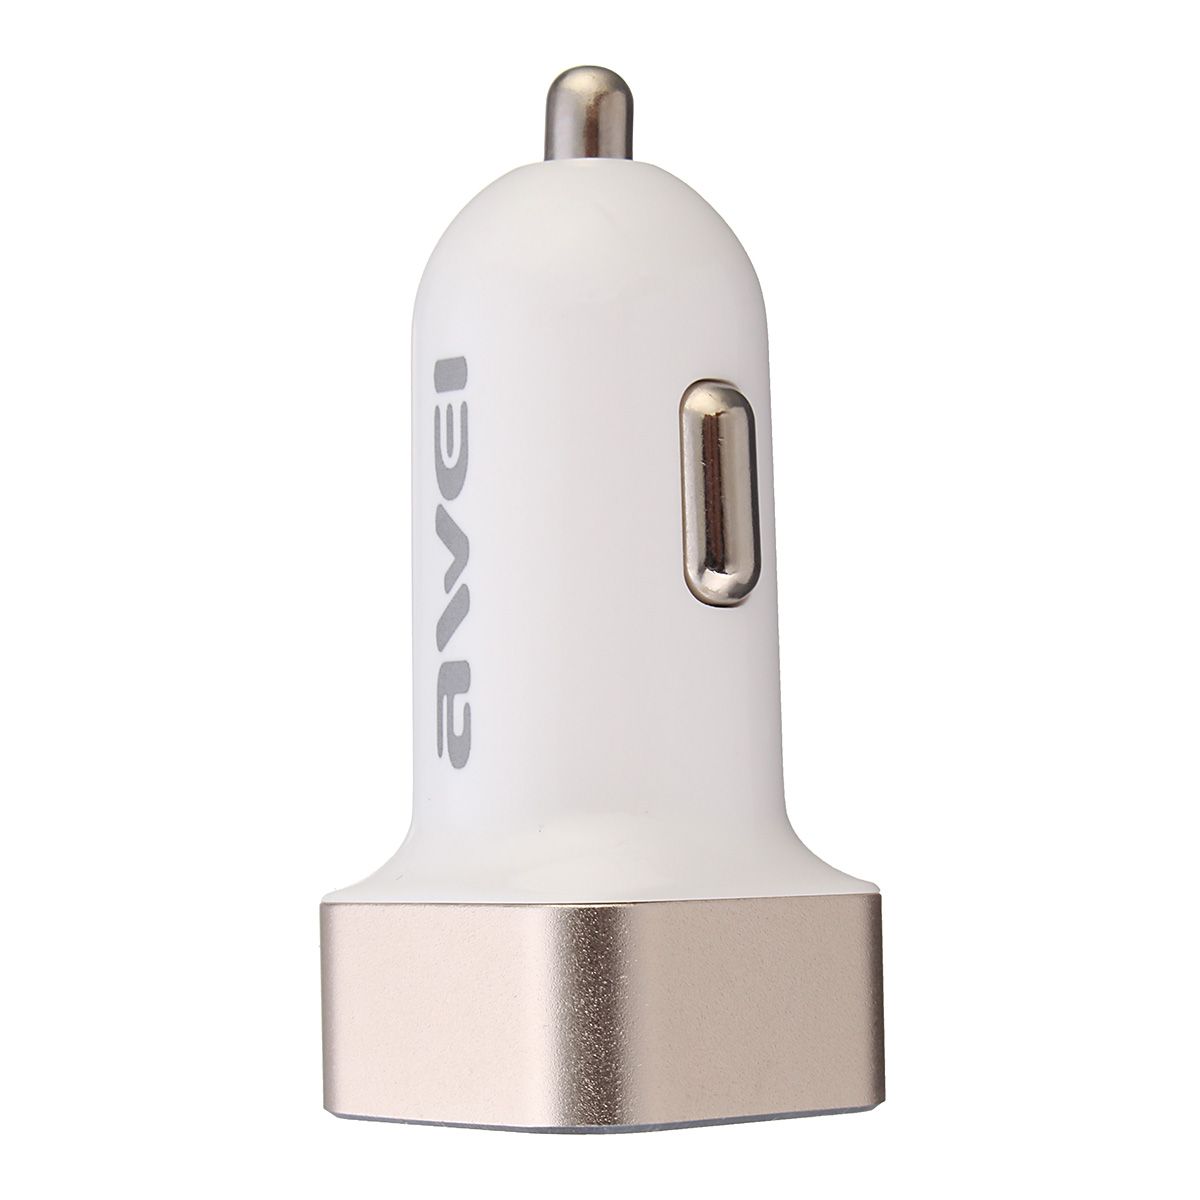 Aweireg-Metal-Dual-USB-Quick-Car-Charger-5V-24A-For-iPhone-SE6S6S-Plus66-PlusGalaxy-S7-Ipad-1112918